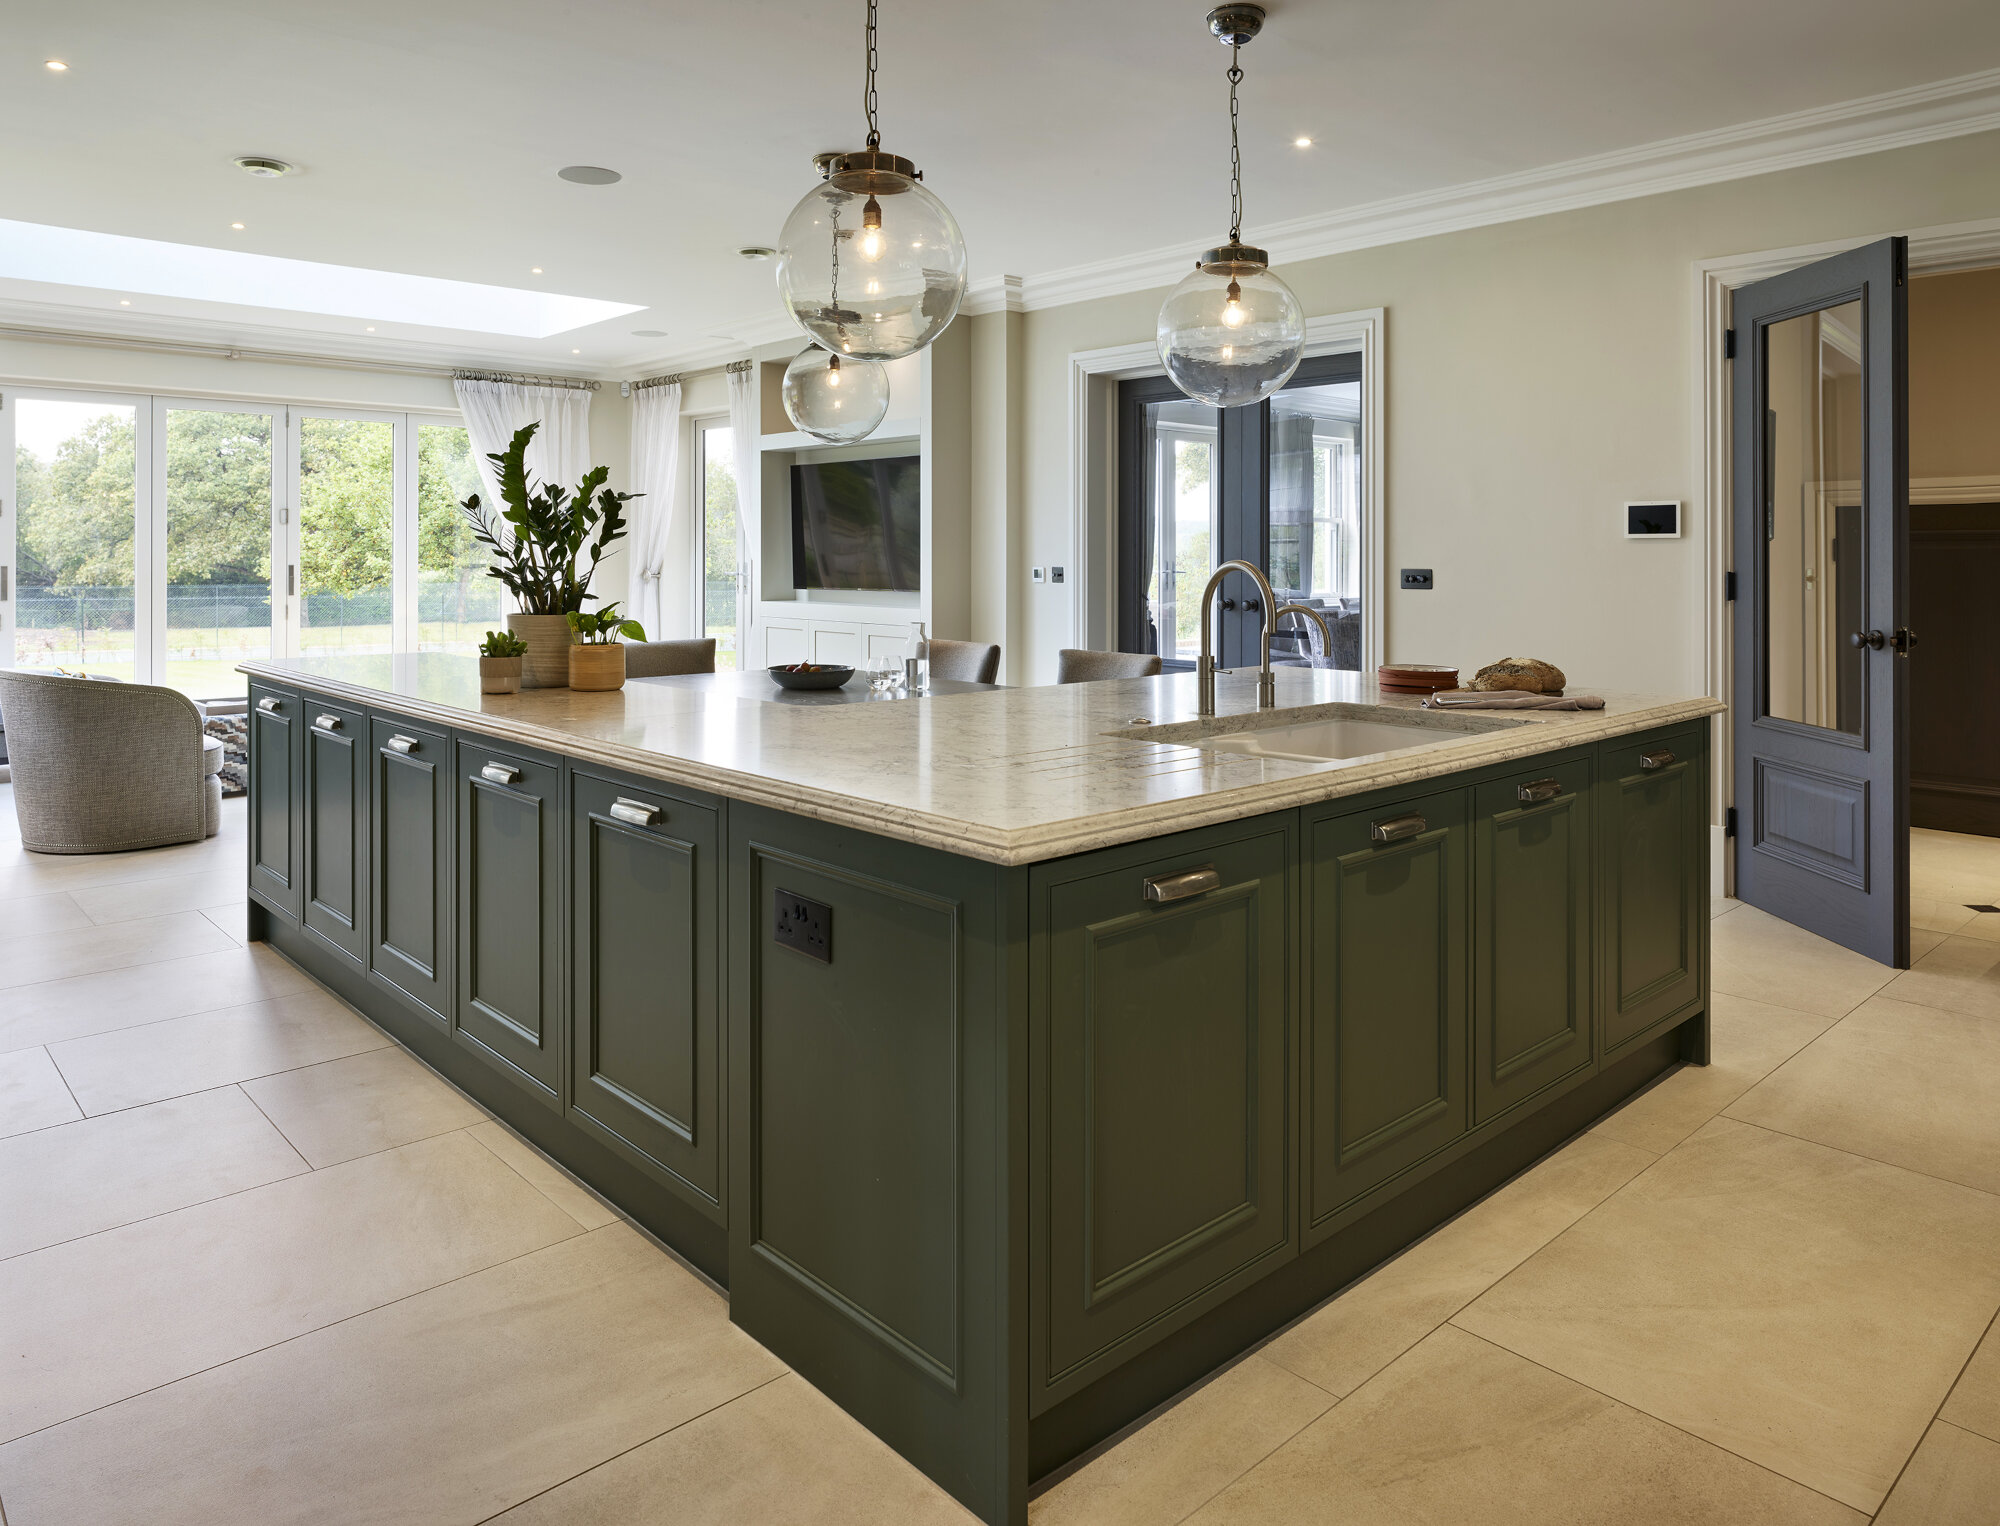 High End traditional Kitchens In Barton-upon-Humber